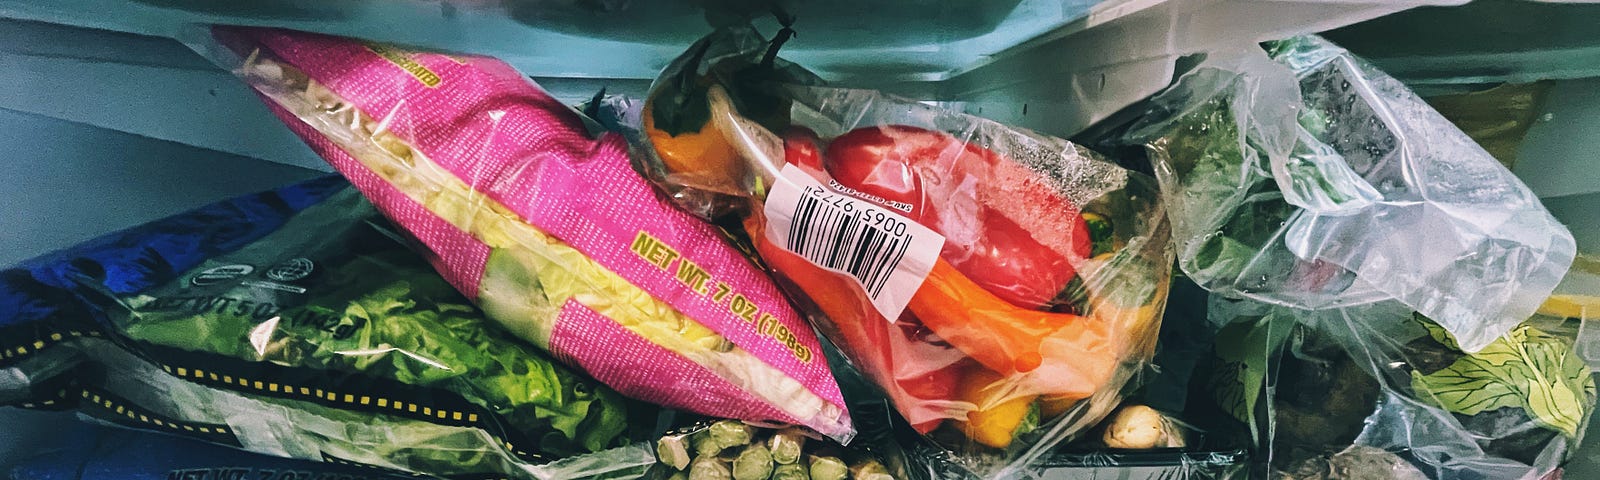 Vegetables packaged in plastic bags, stacked in a fridge shelf.